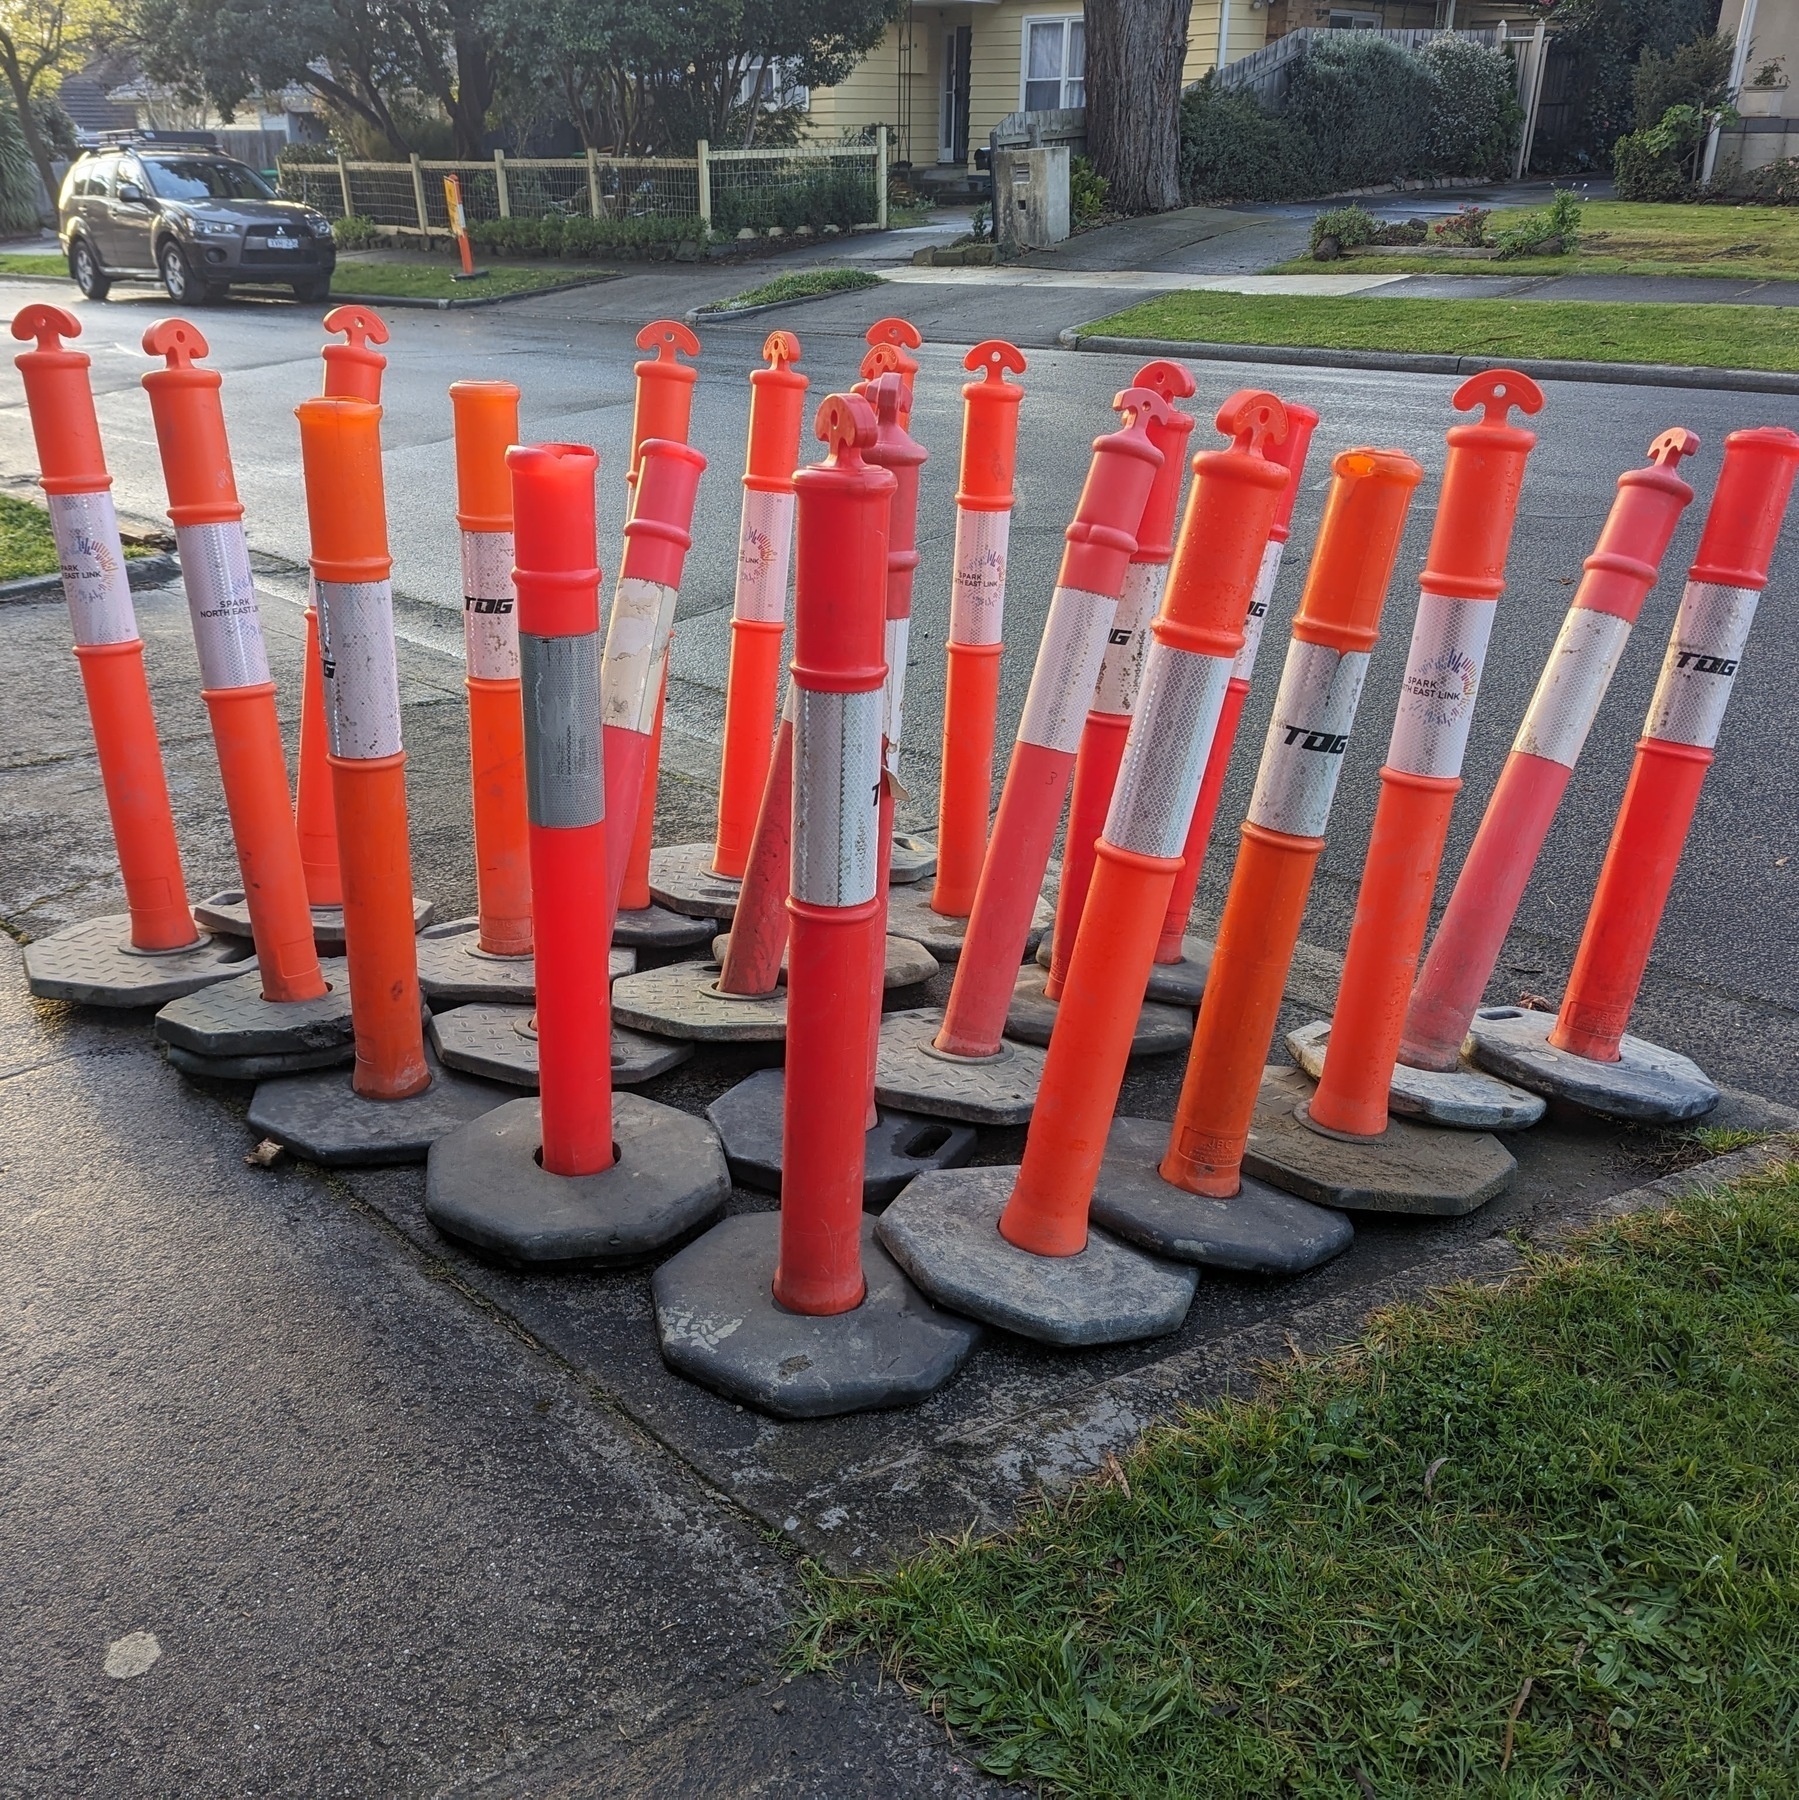 A group of orange traffic cylinders, sort of like cones but about waste high, on the side of a road with a black car in the background